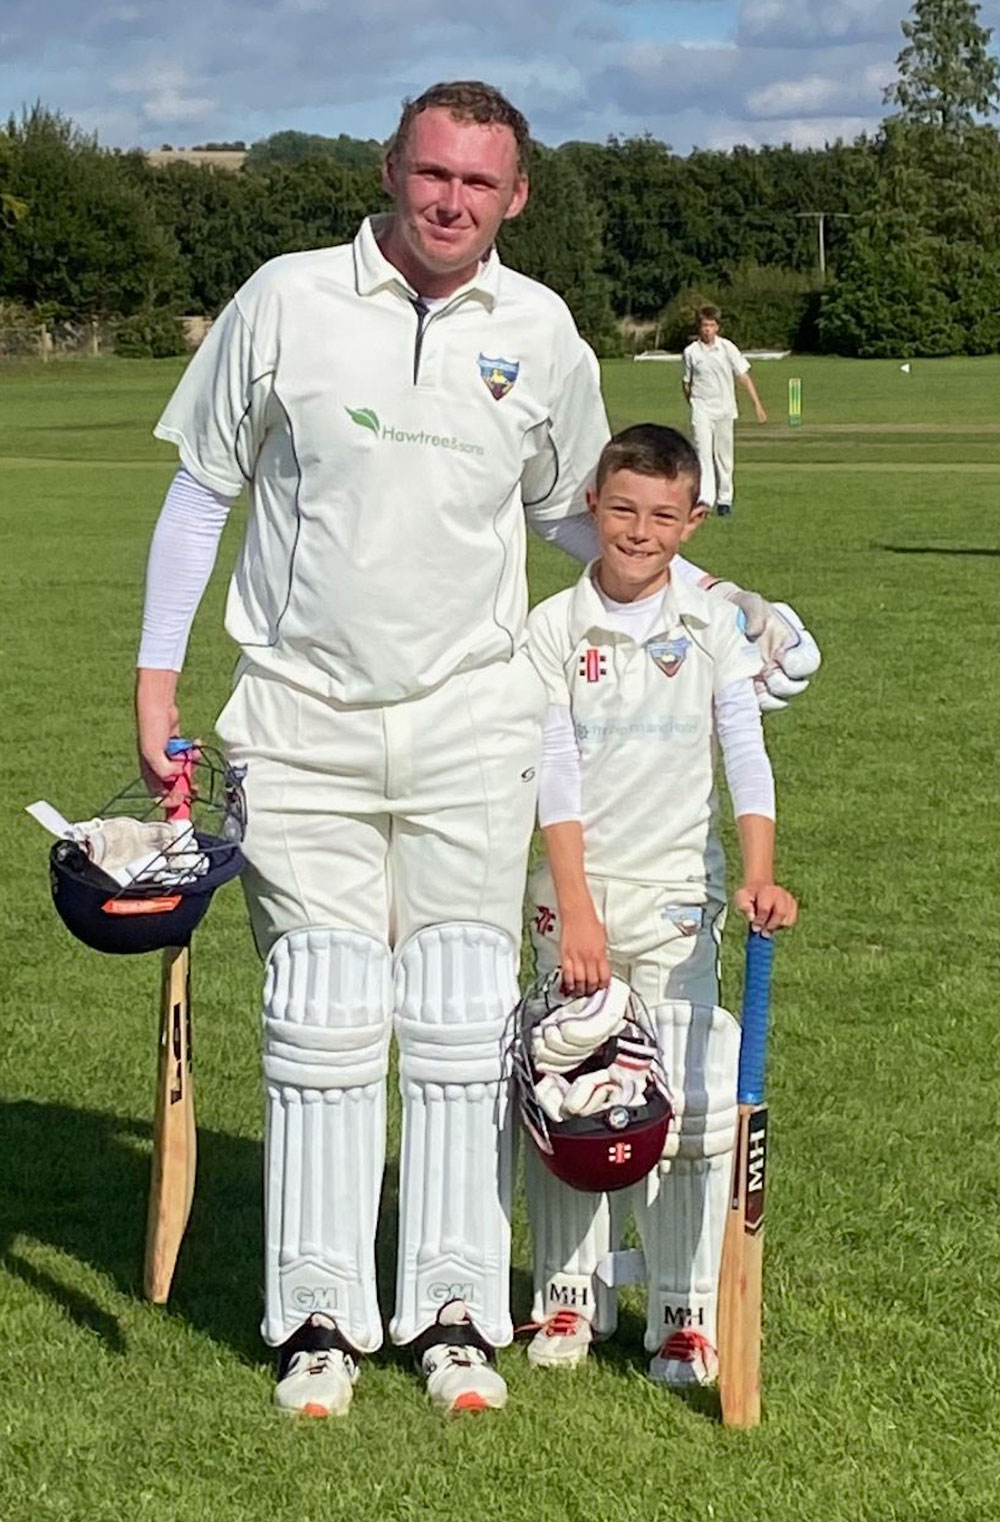 Freddie Jones has been at the club since he could hold a bat, and is currently an under-10 county cricketer